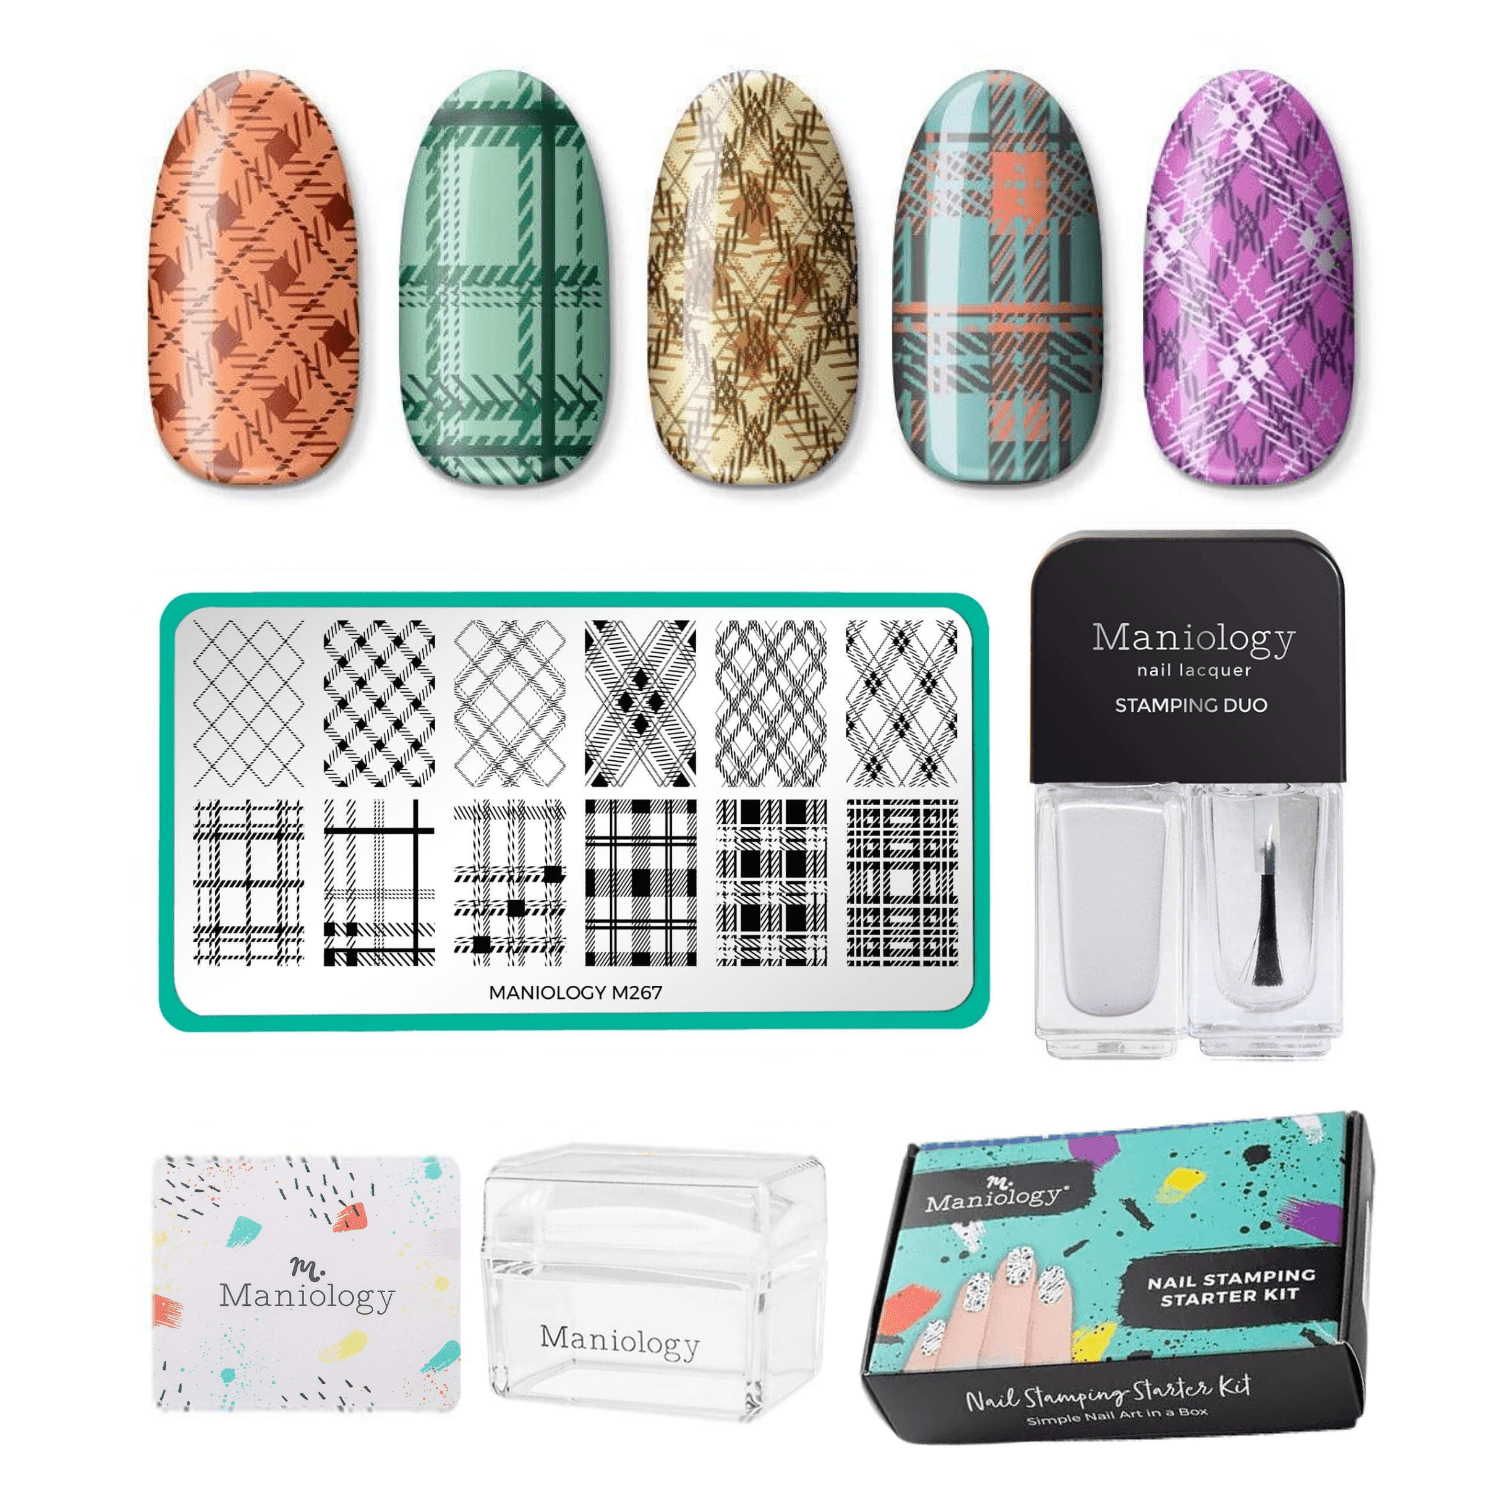 Sports and Hobby Nail Art in just minutes ~ Football, Baseball, Basketball  and more #Jamberry - A Thrifty Mom